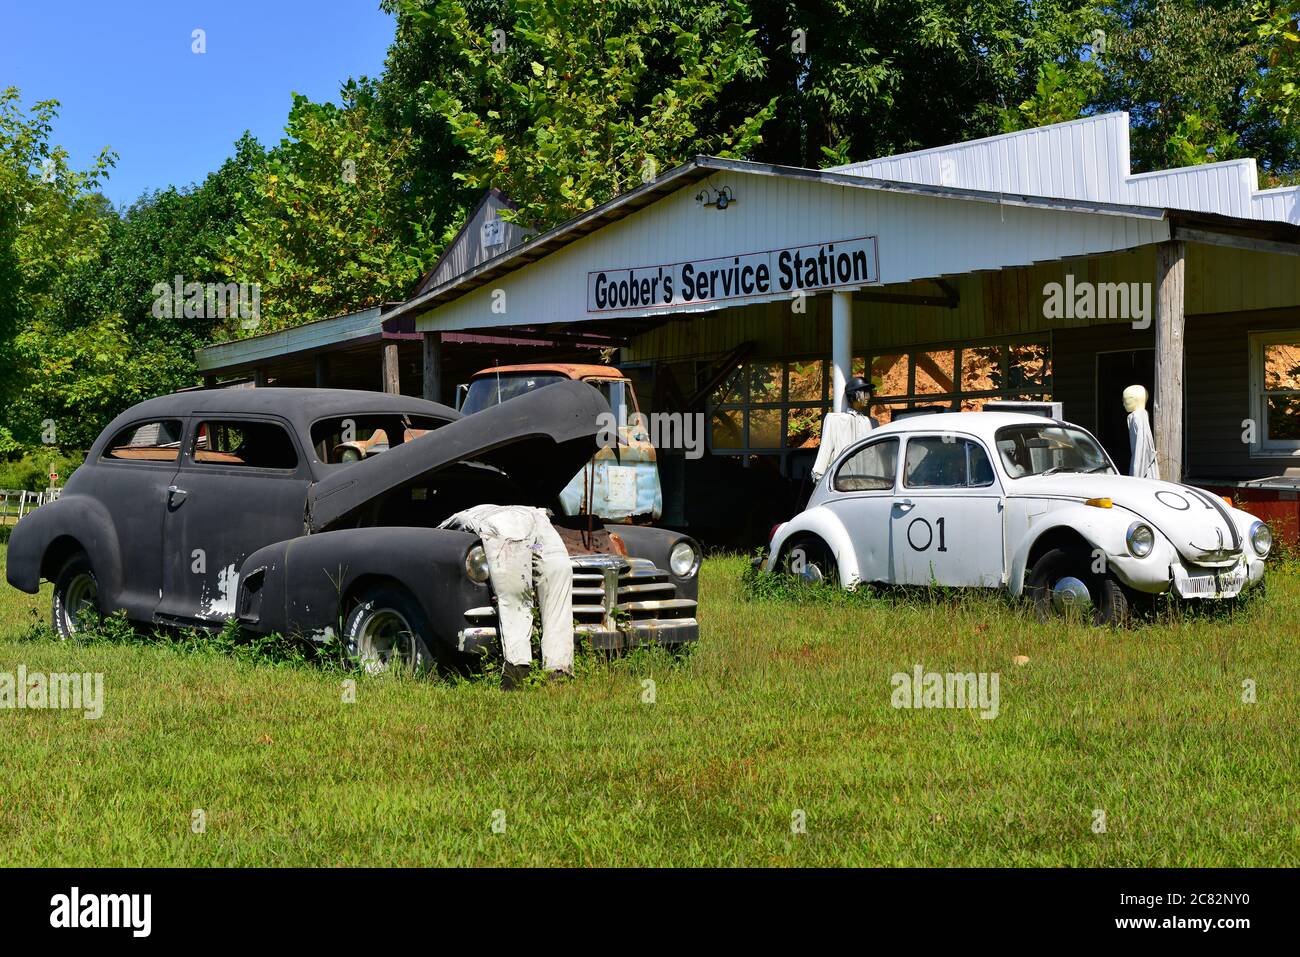 Fake Goober's Service Station at Fake Town, with stuffed mechanic  including 1940s Chevrolet and old VW Bug in rural Macon County, in middle TN, USA Stock Photo